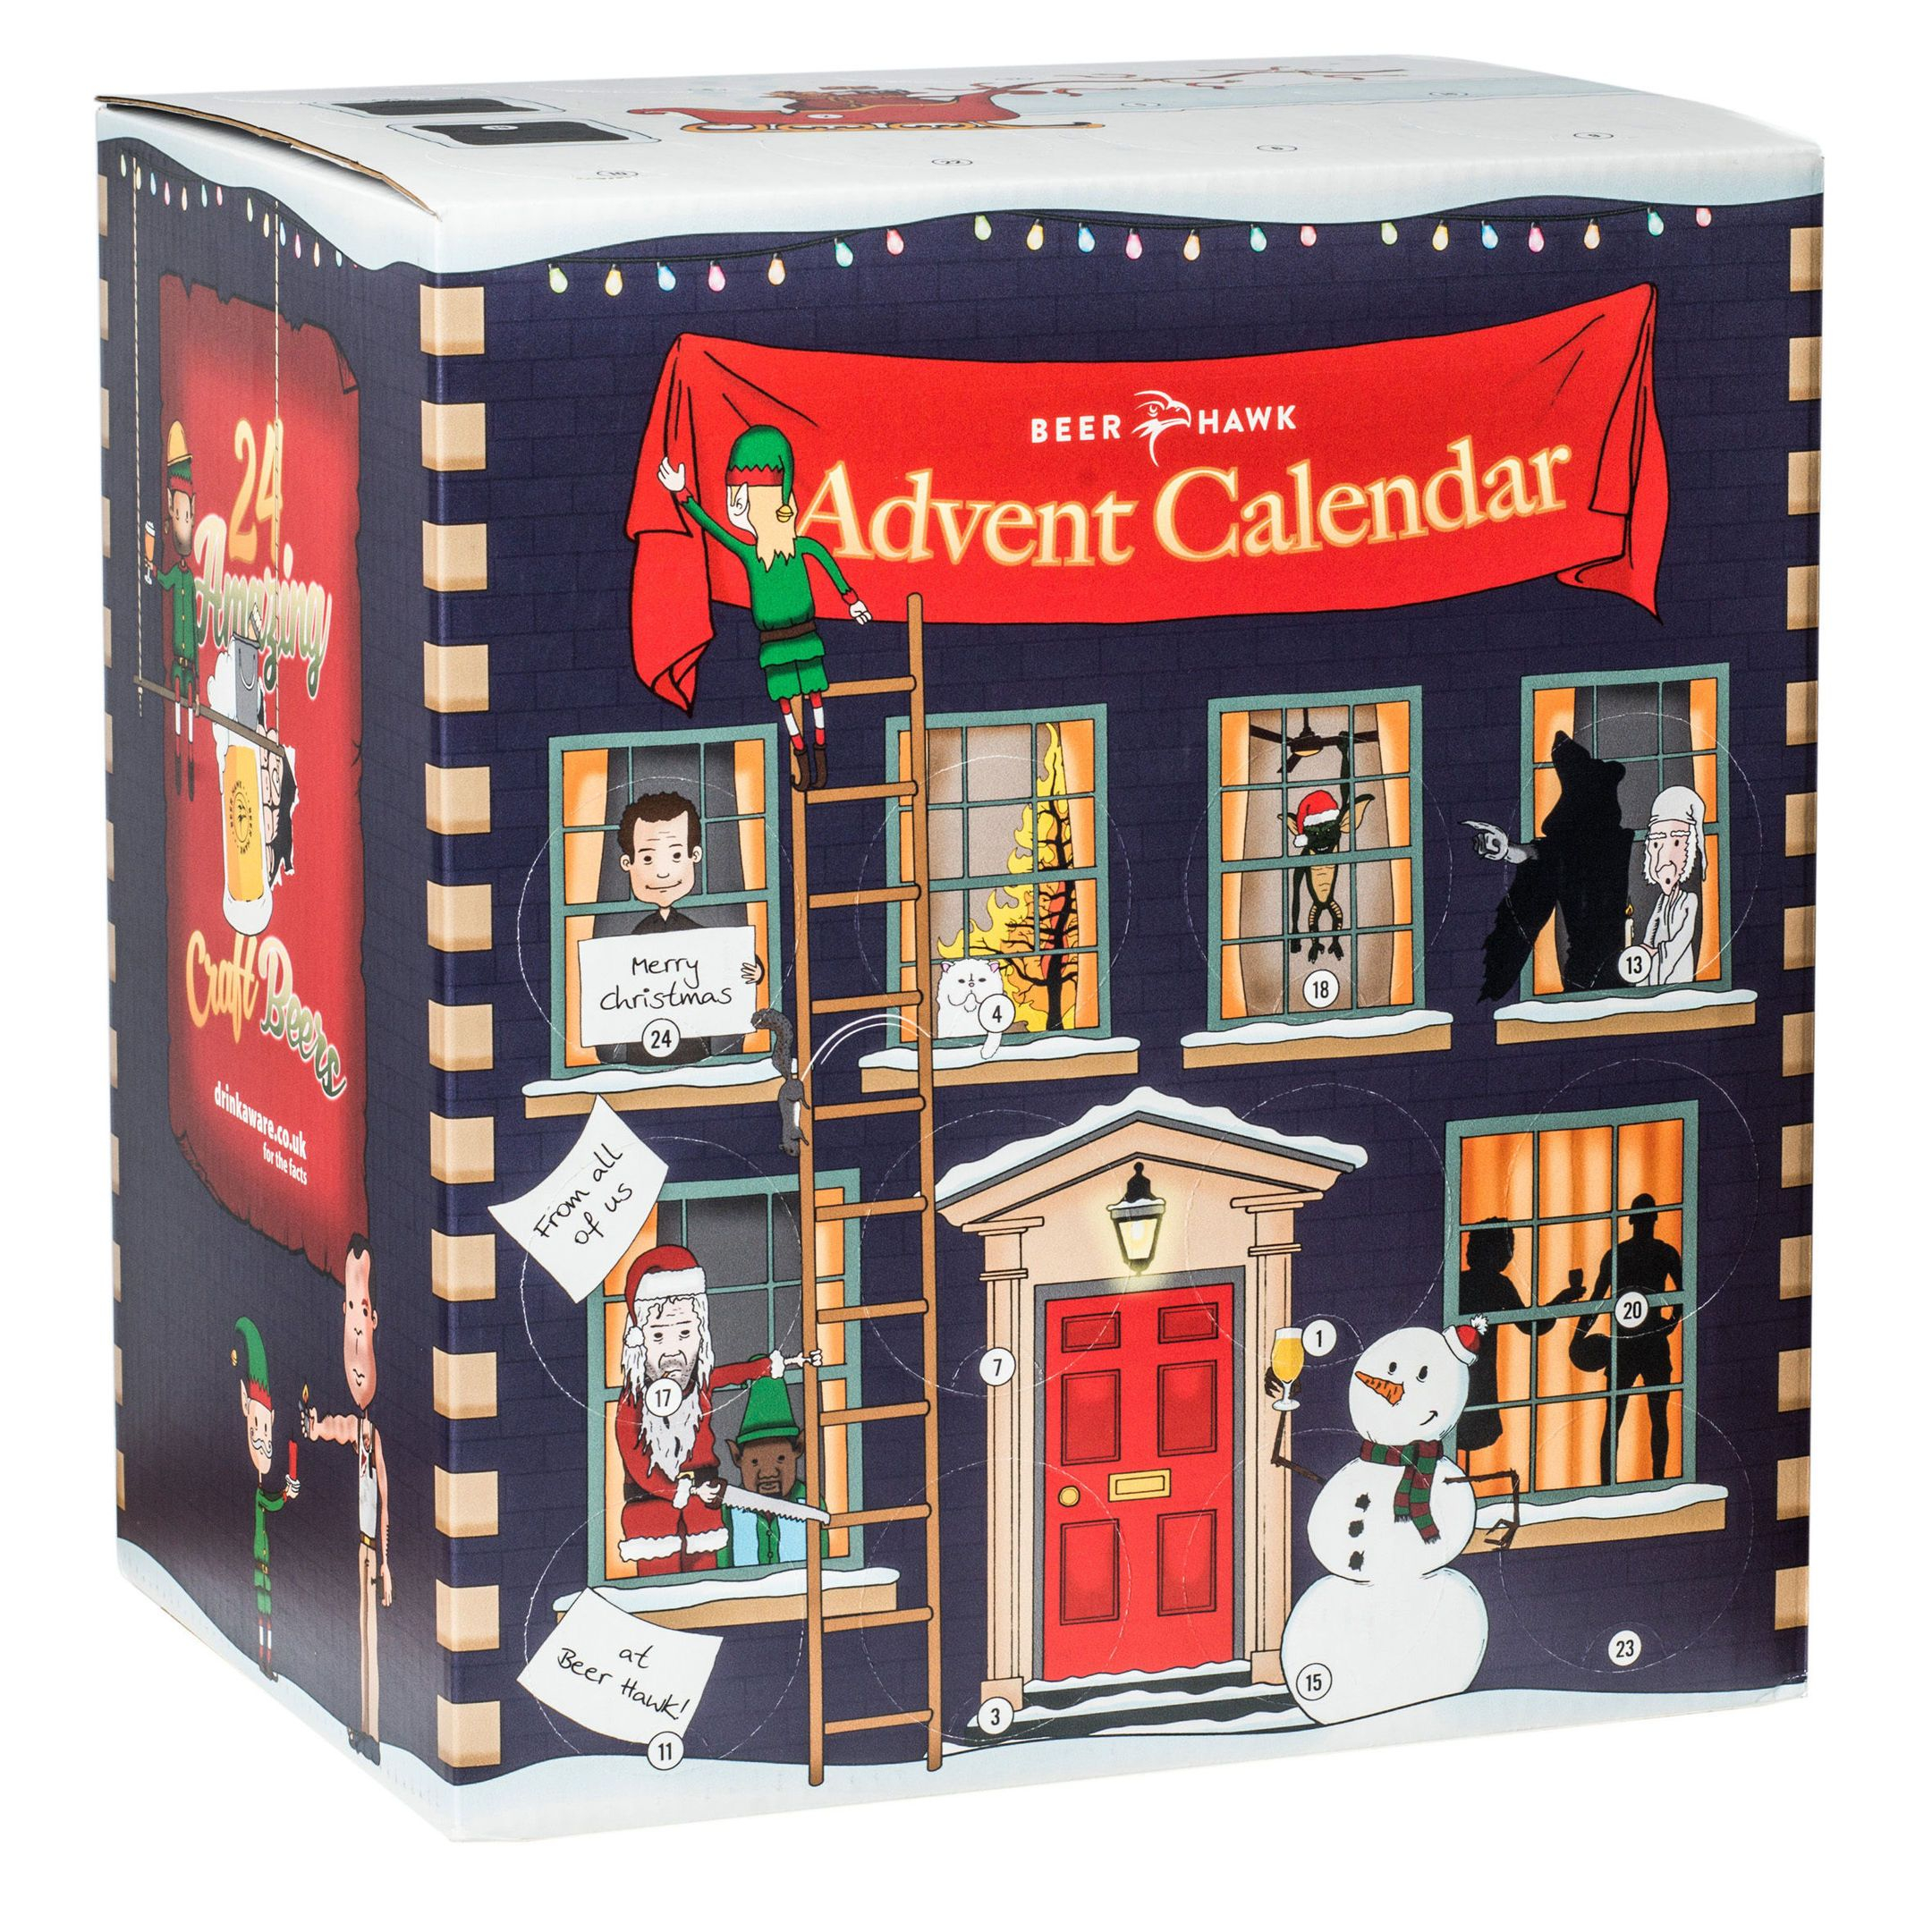 Do You Have £10K For An Advent Calendar? Here Are This